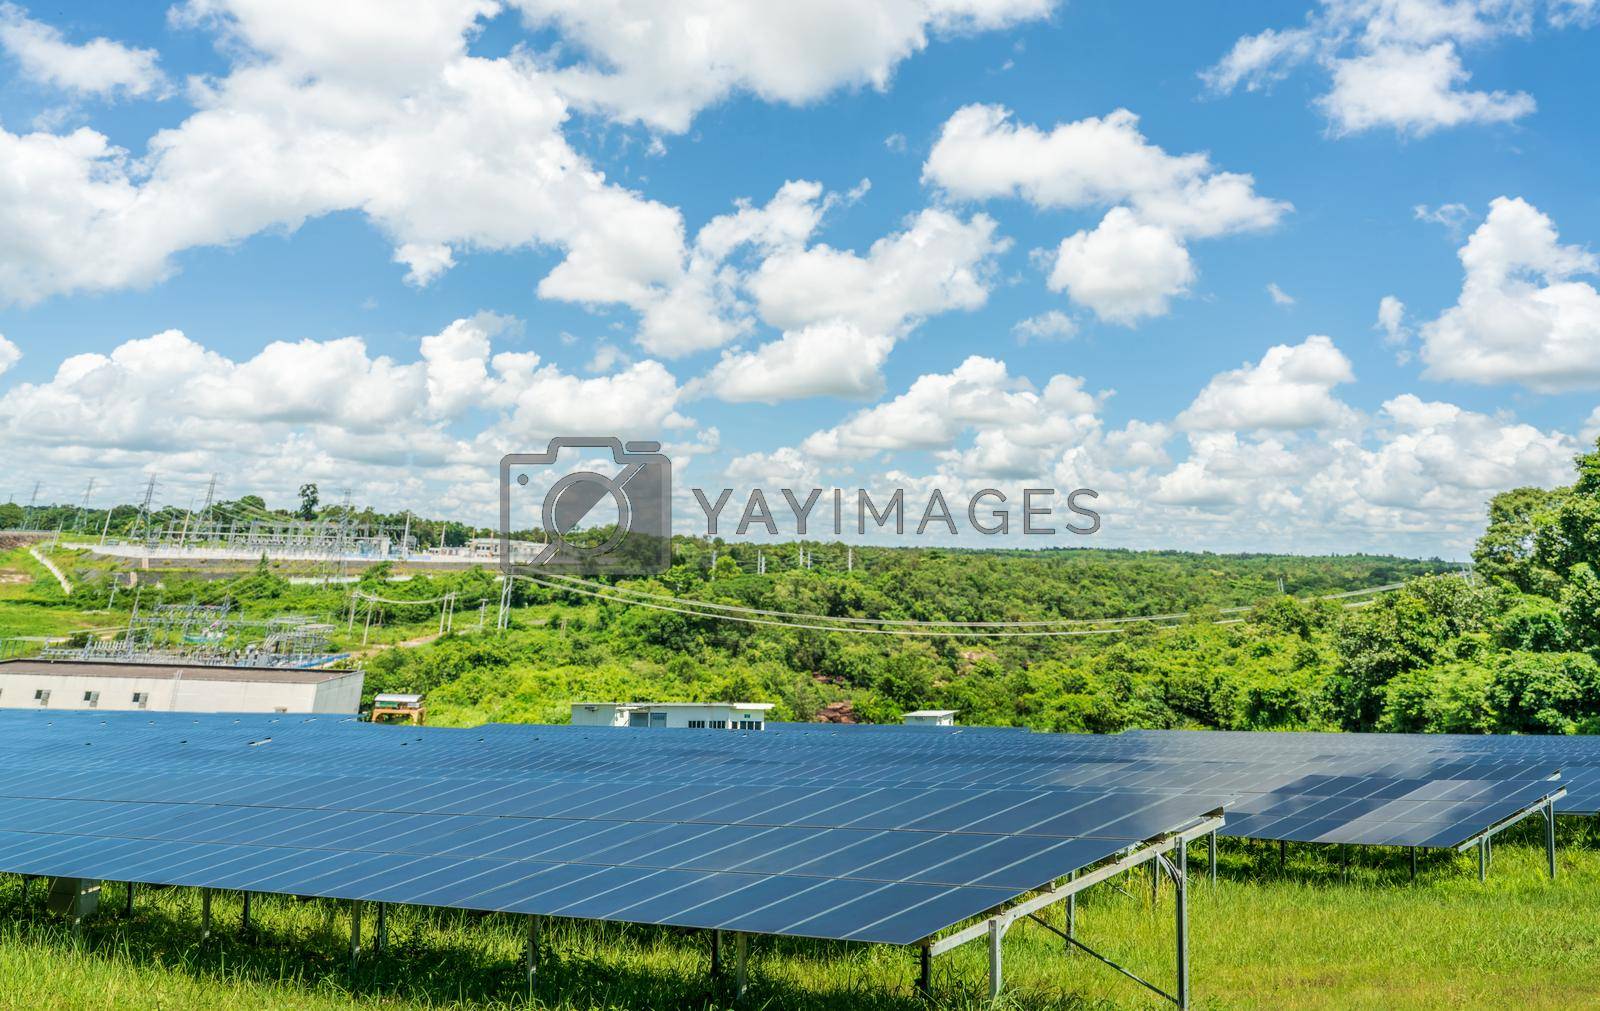 Royalty free image of Photovoltaic power station or solar park. PV system. Solar farm and green field. Solar power for green energy. Photovoltaic power plant generate solar energy. Renewable energy. Sustainable resources. by Fahroni